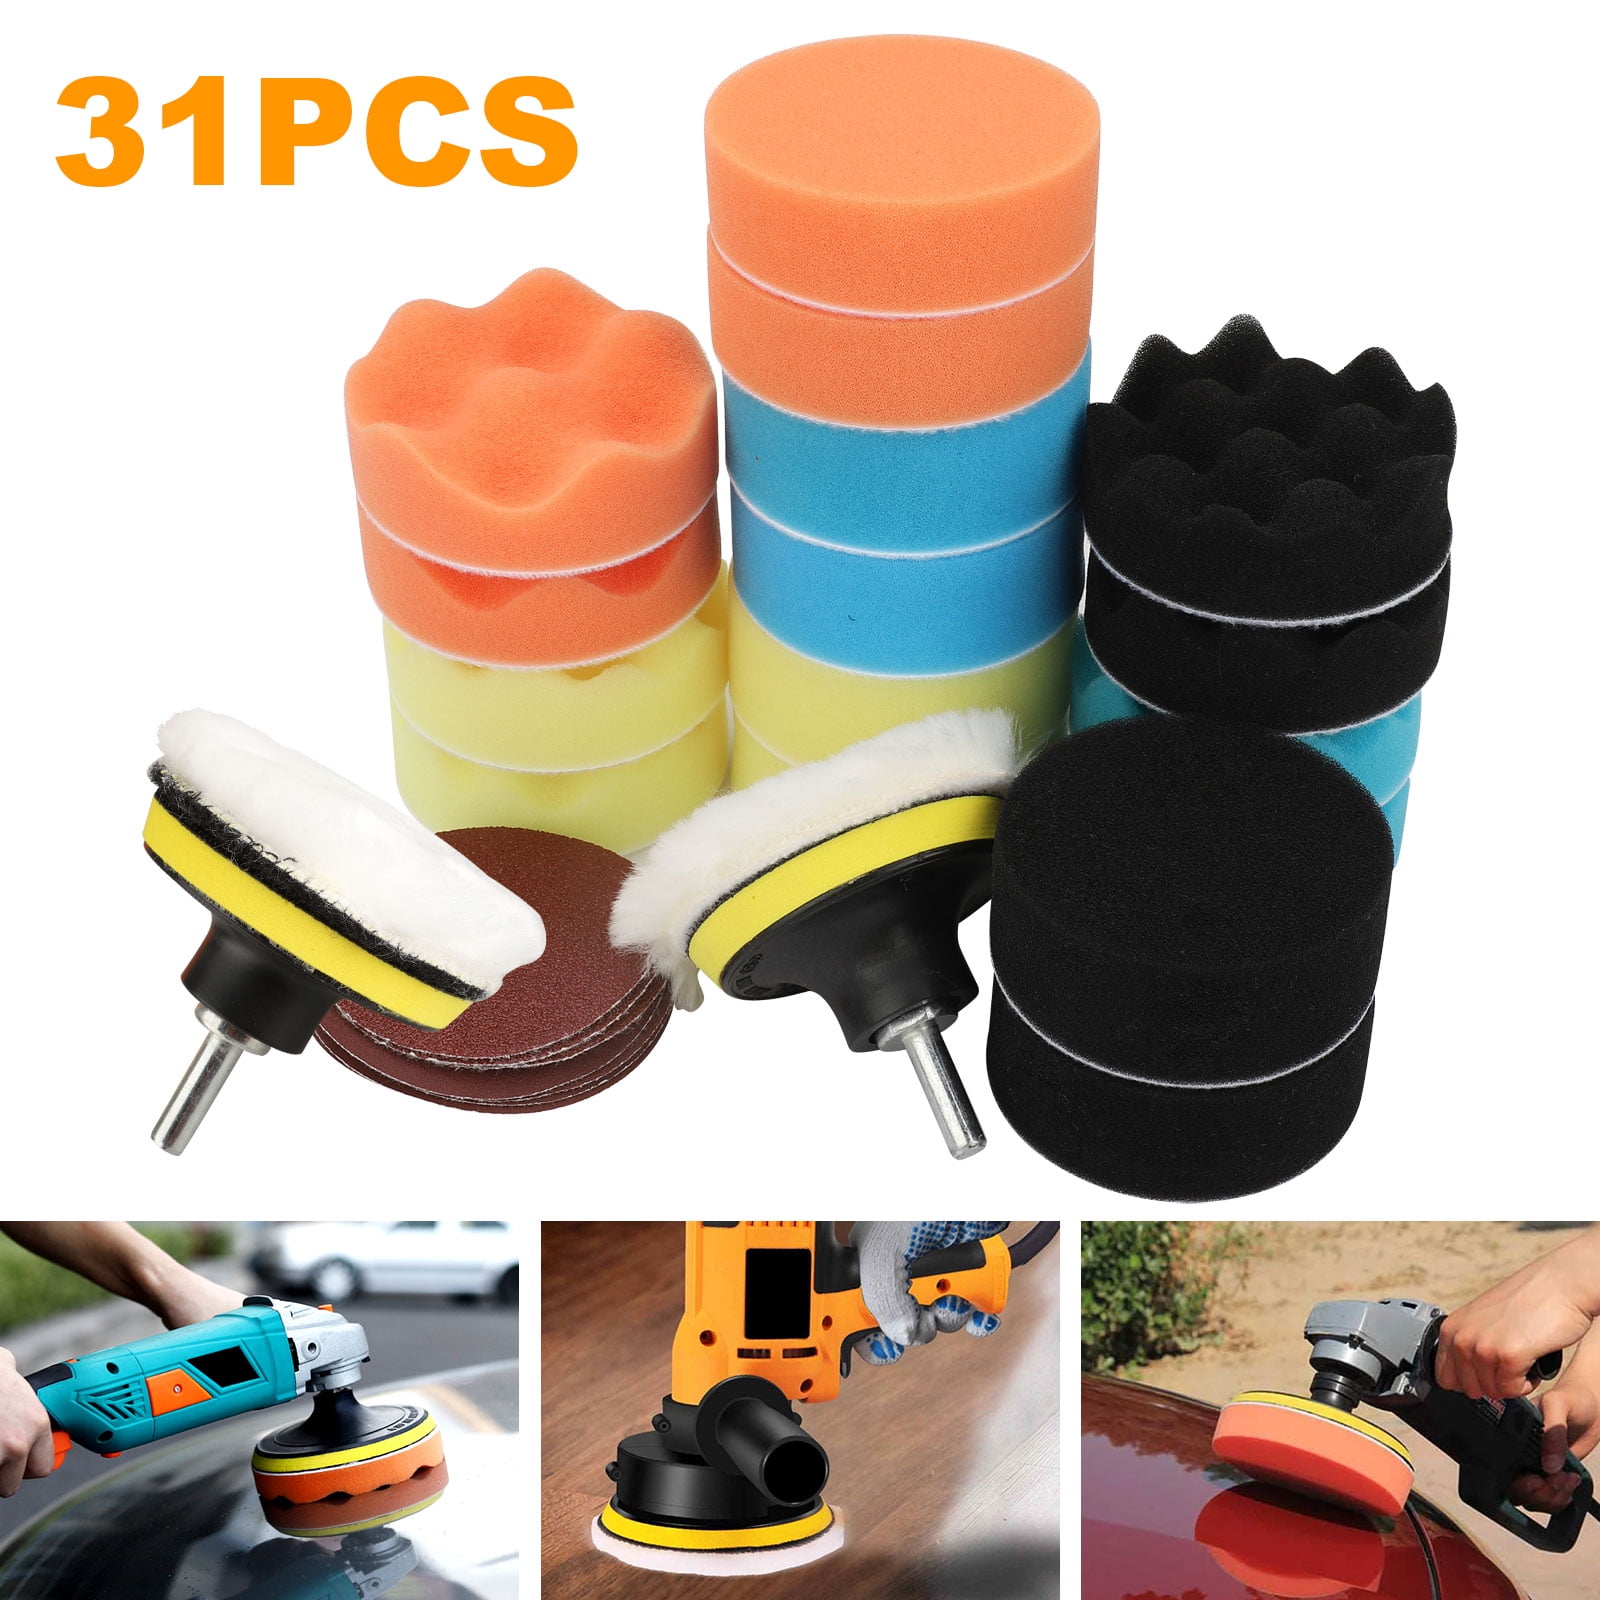 6pc 3 Foam Polishing Pad with 3 Hook and Loop Pad & 1/4 Shank Drill Adapter 